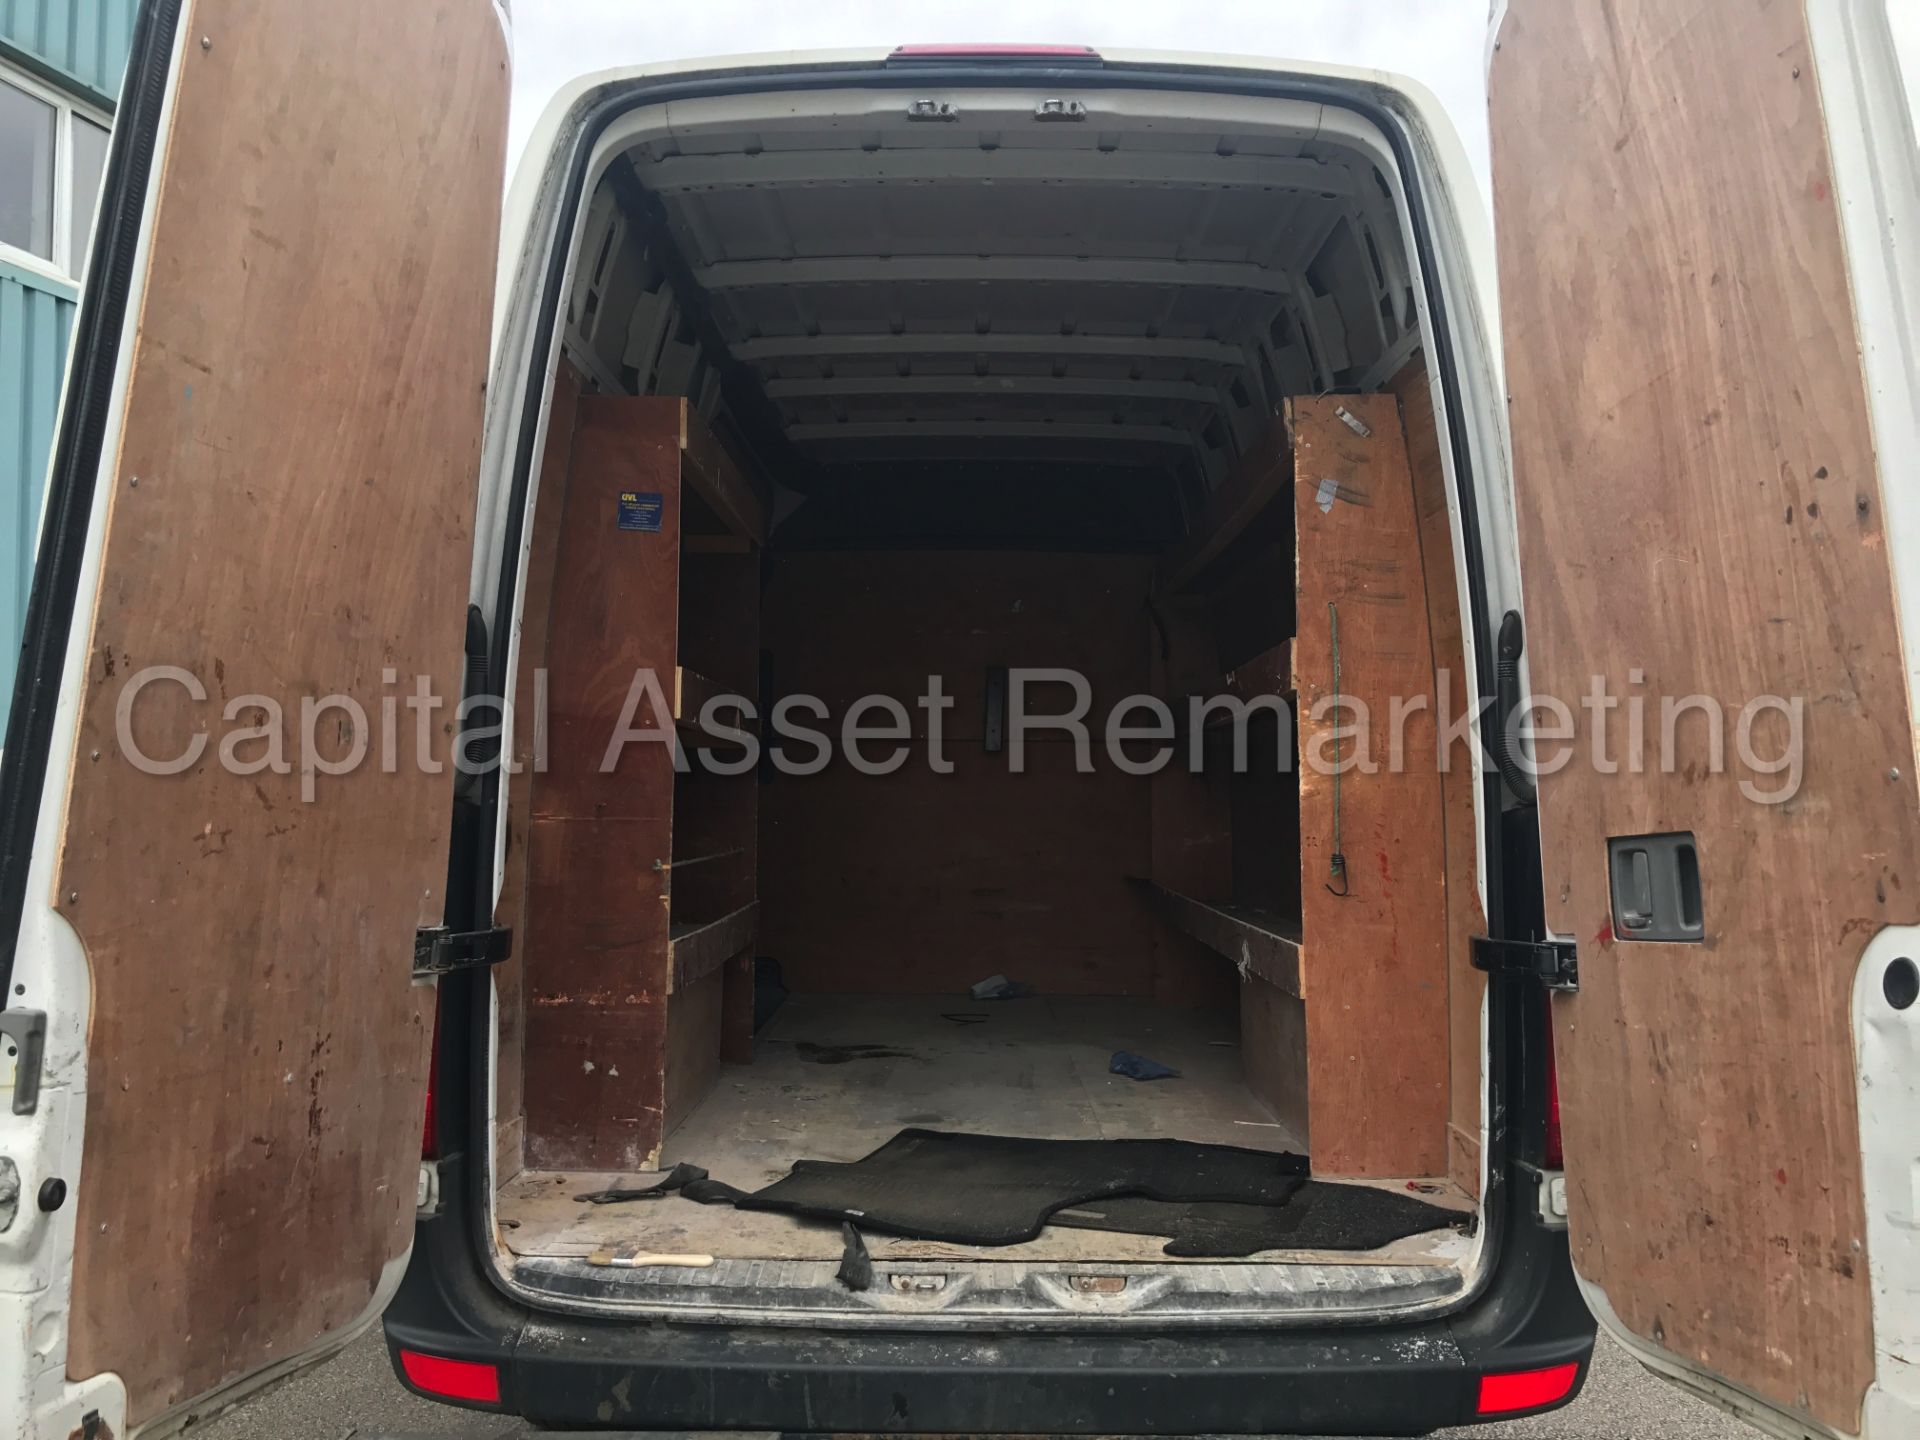 VOLKSWAGEN CRAFTER CR35 'MWB HI-ROOF' (2014) '2.0 TDI - 109 PS - 6 SPEED' *1 COMPANY OWNER FROM NEW* - Image 14 of 19